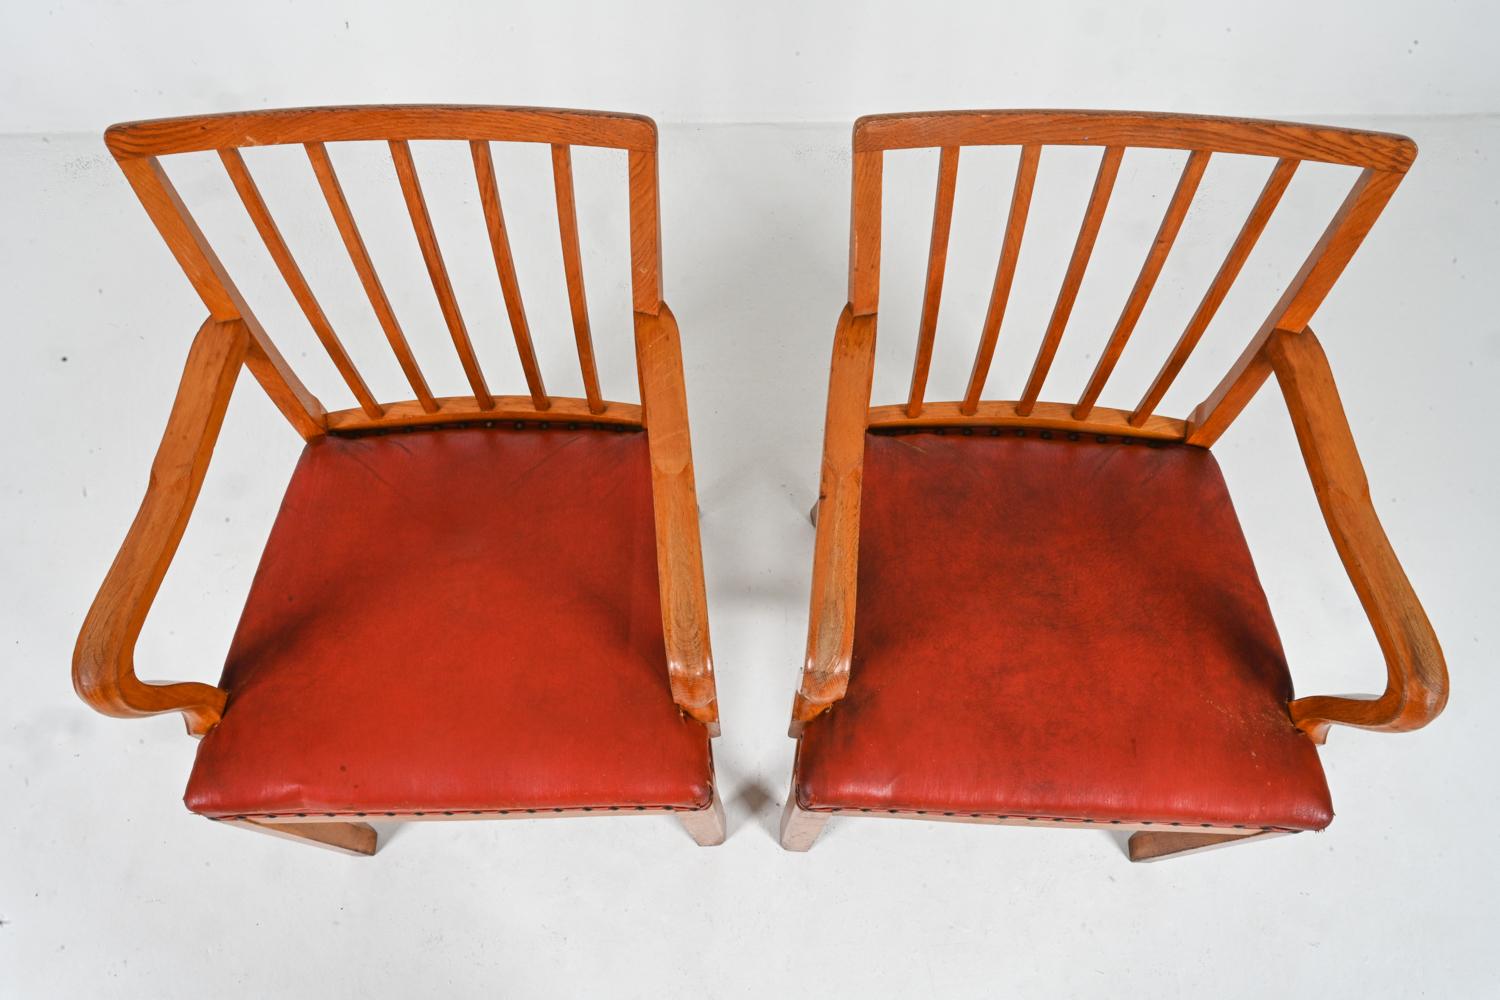 20th Century Pair of Danish Oak Armchairs Attributed to Steen Eiler Rasmussen, c. 1950's For Sale